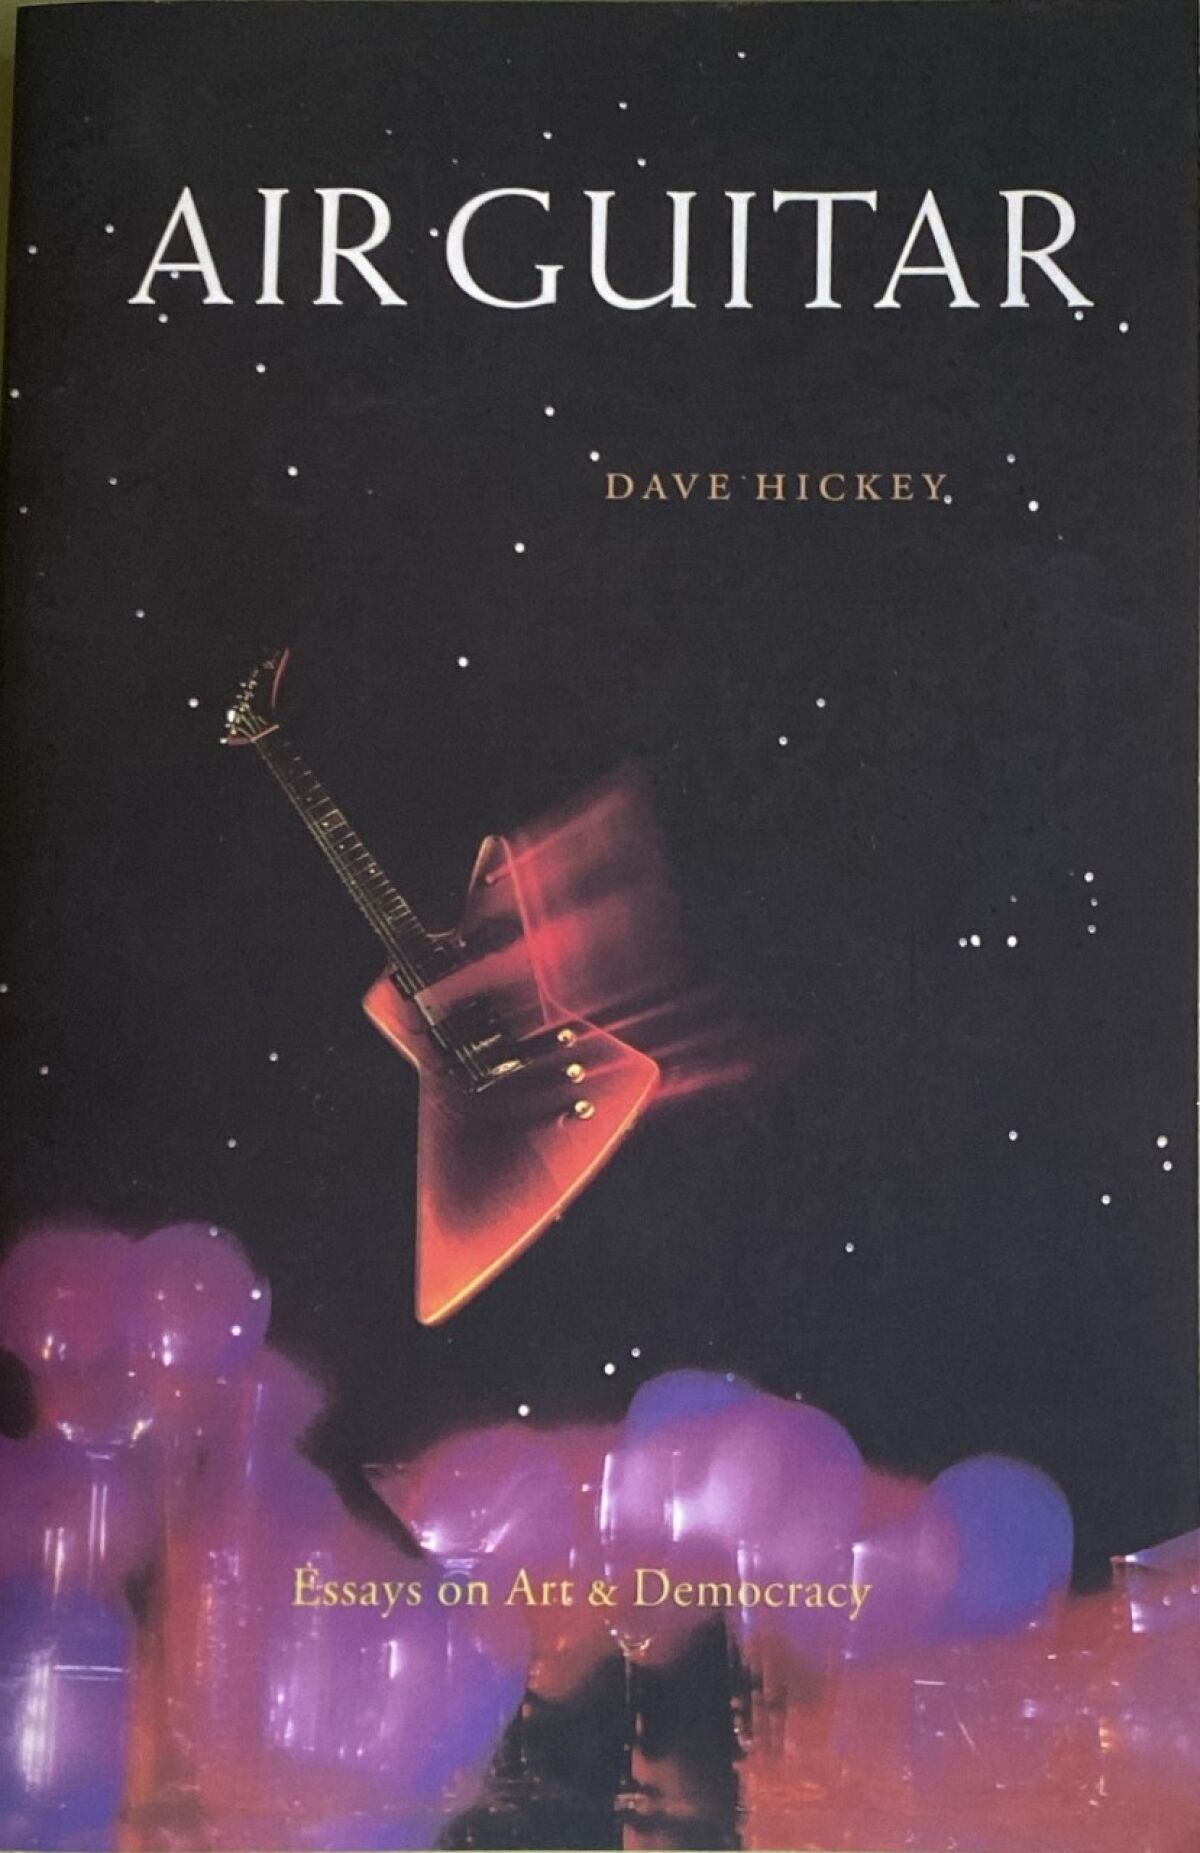 The cover of Dave Hickey's book "Air Guitar: Essays on Art & Democracy" shows a guitar floating in the night sky.